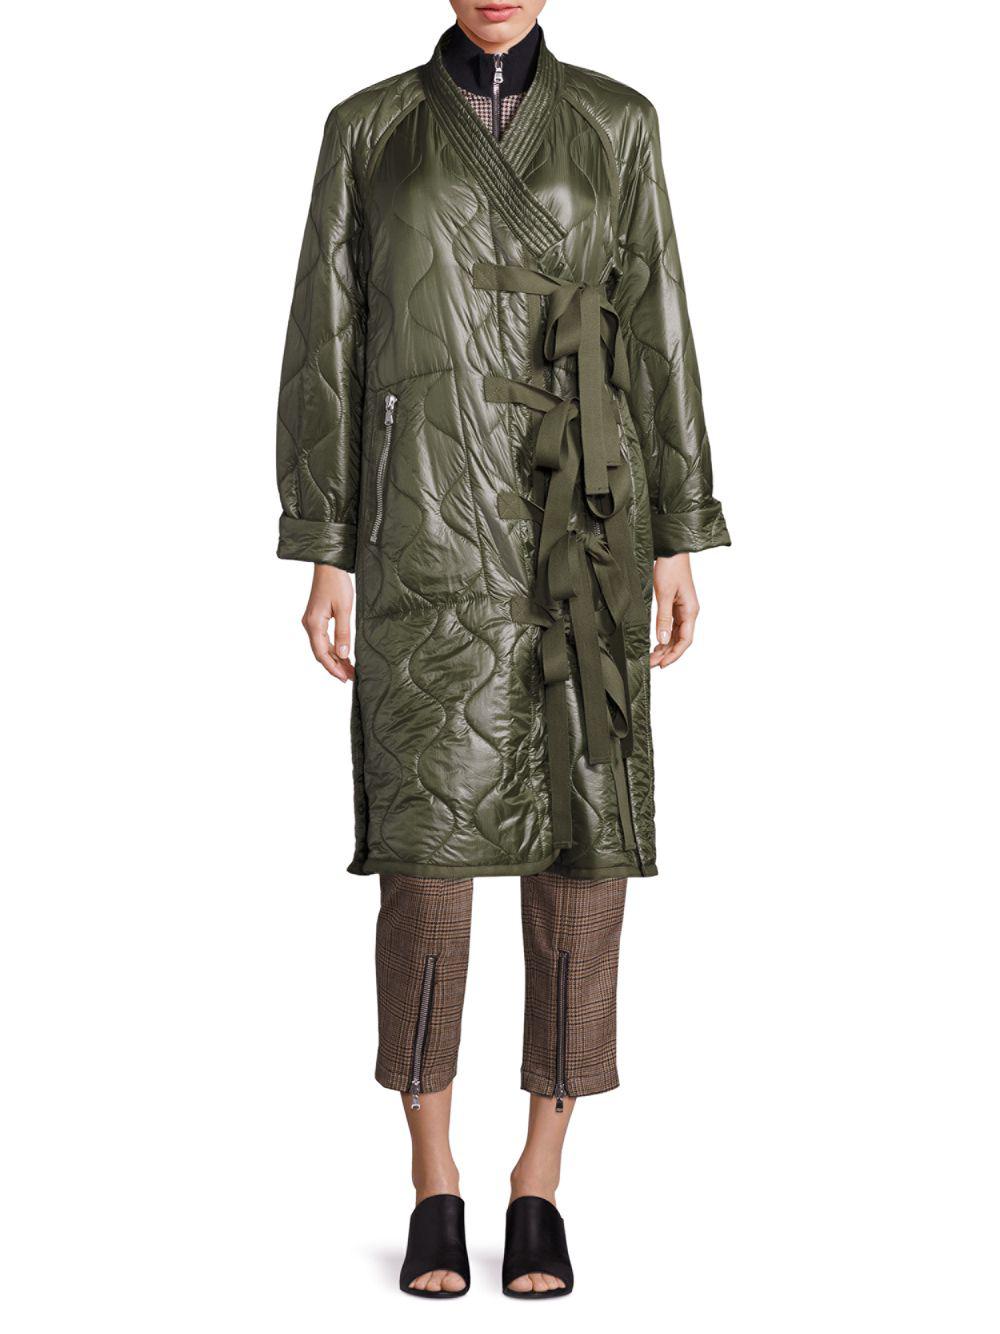 3.1 Phillip Lim Synthetic Long Kimono Quilted Utility Jacket in Green - Lyst